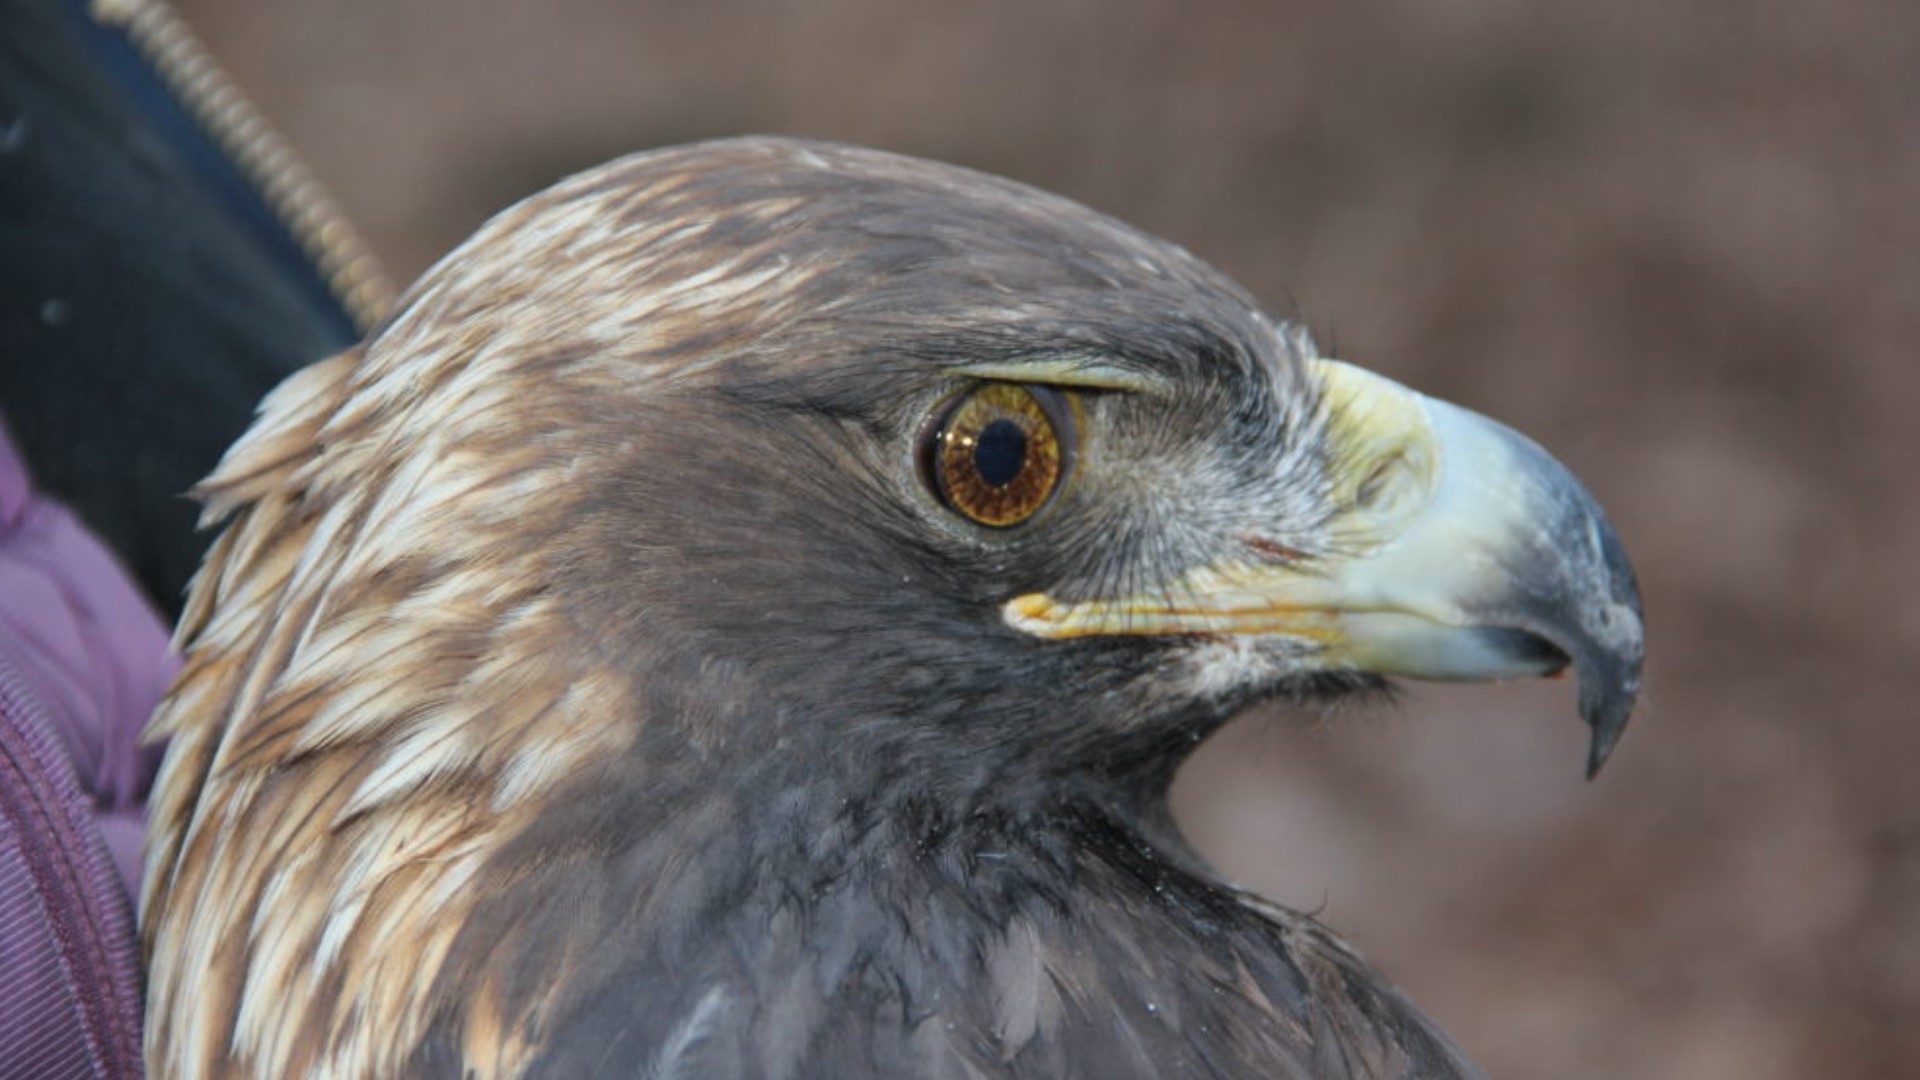 Bernheim Forest’s golden eagle Athena is back. See her 1,700-mile flight, which took her over many new places